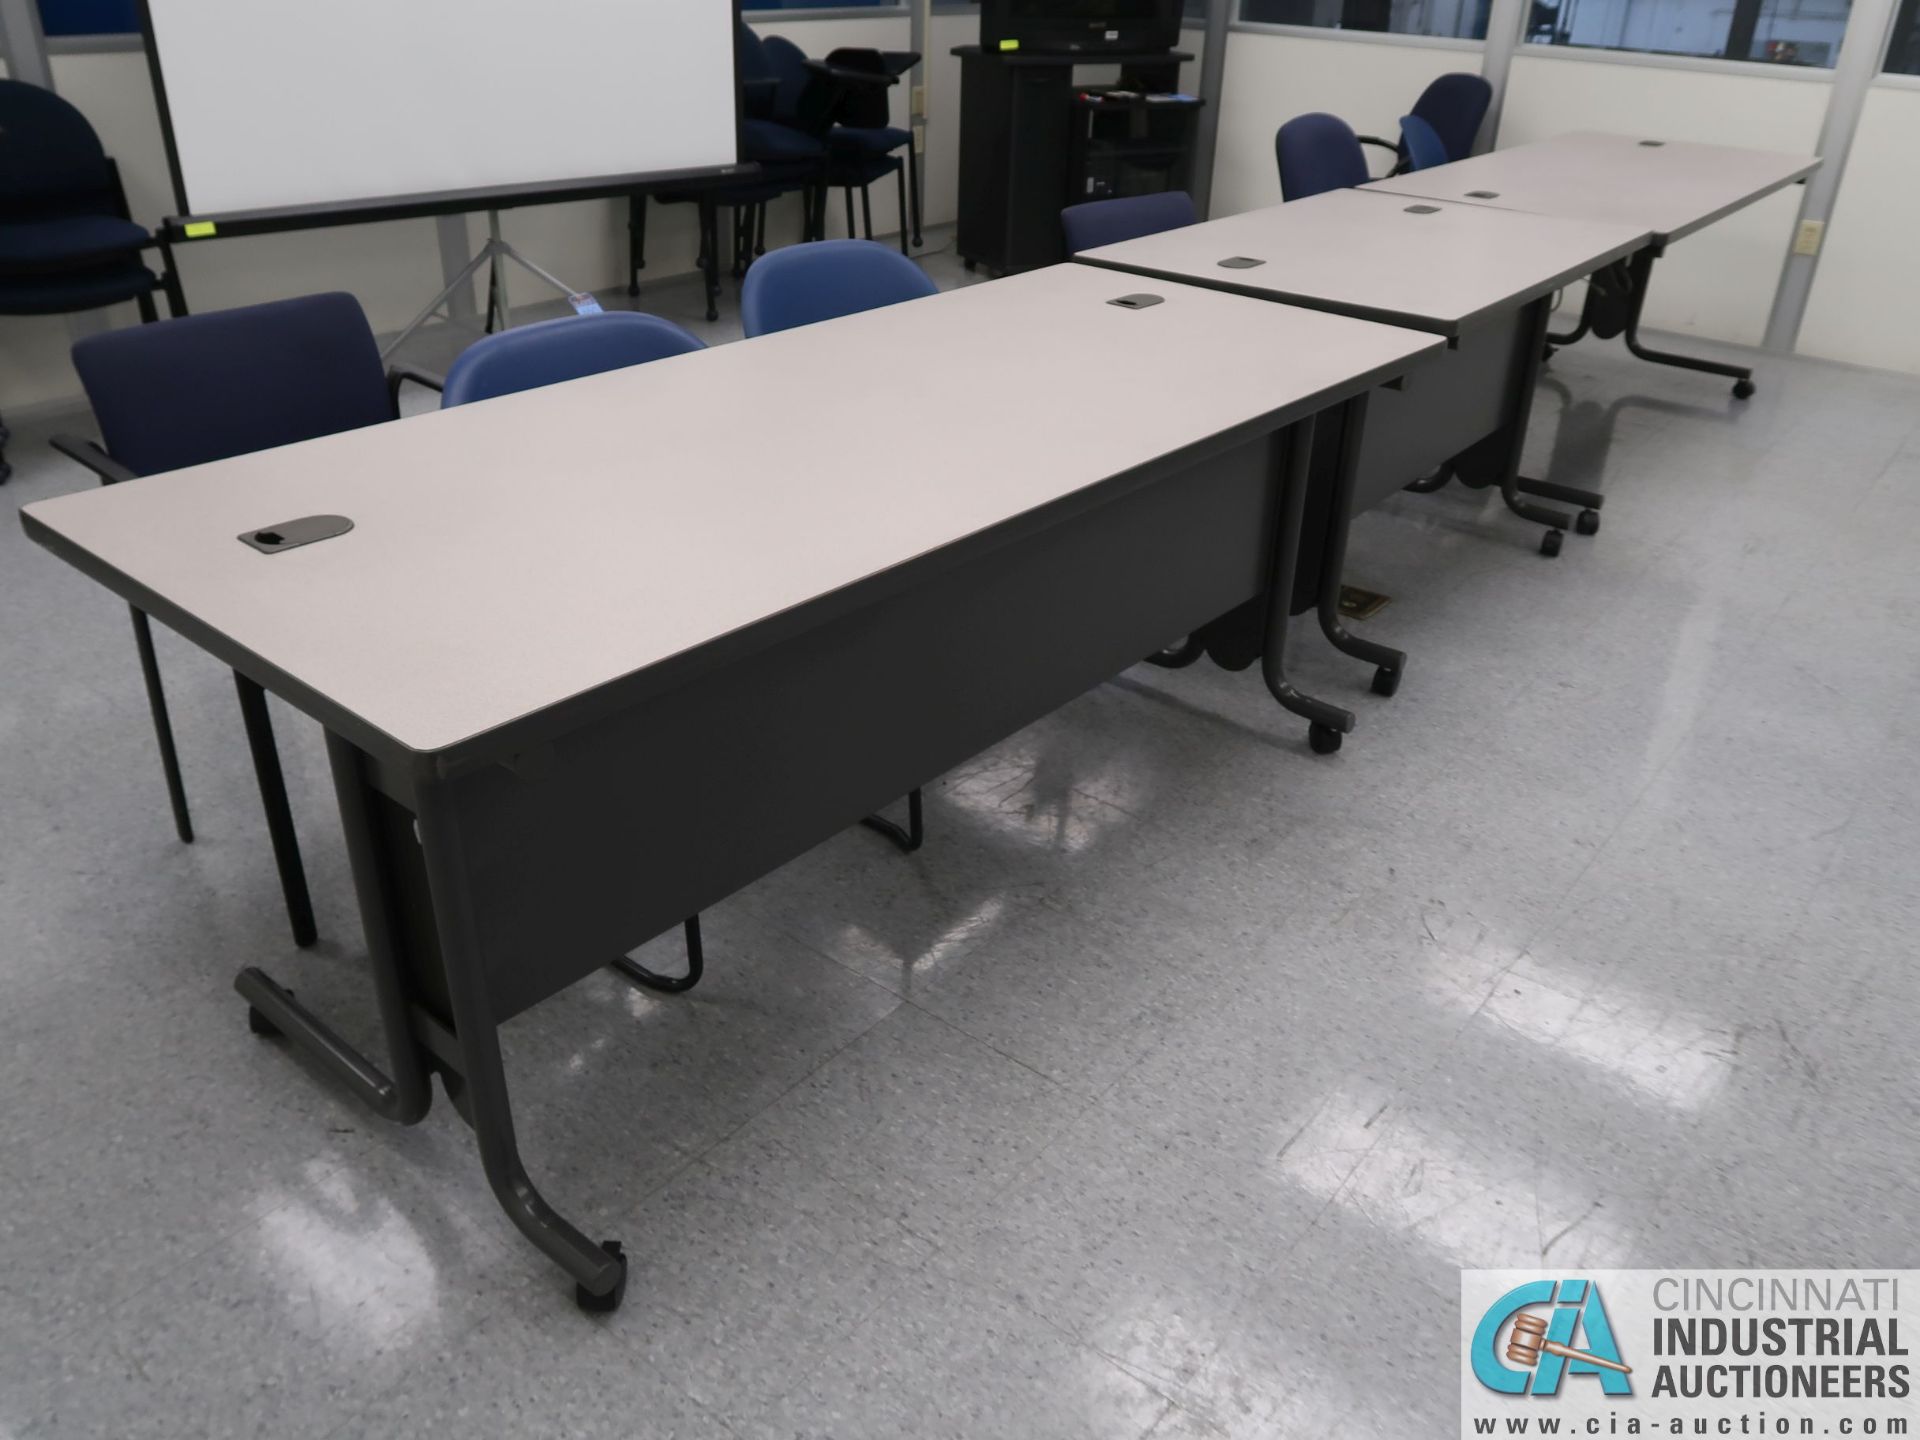 MISCELLANEOUS SIZE LAMINATE TOP TRAINING ROOM TABLES - Image 3 of 3